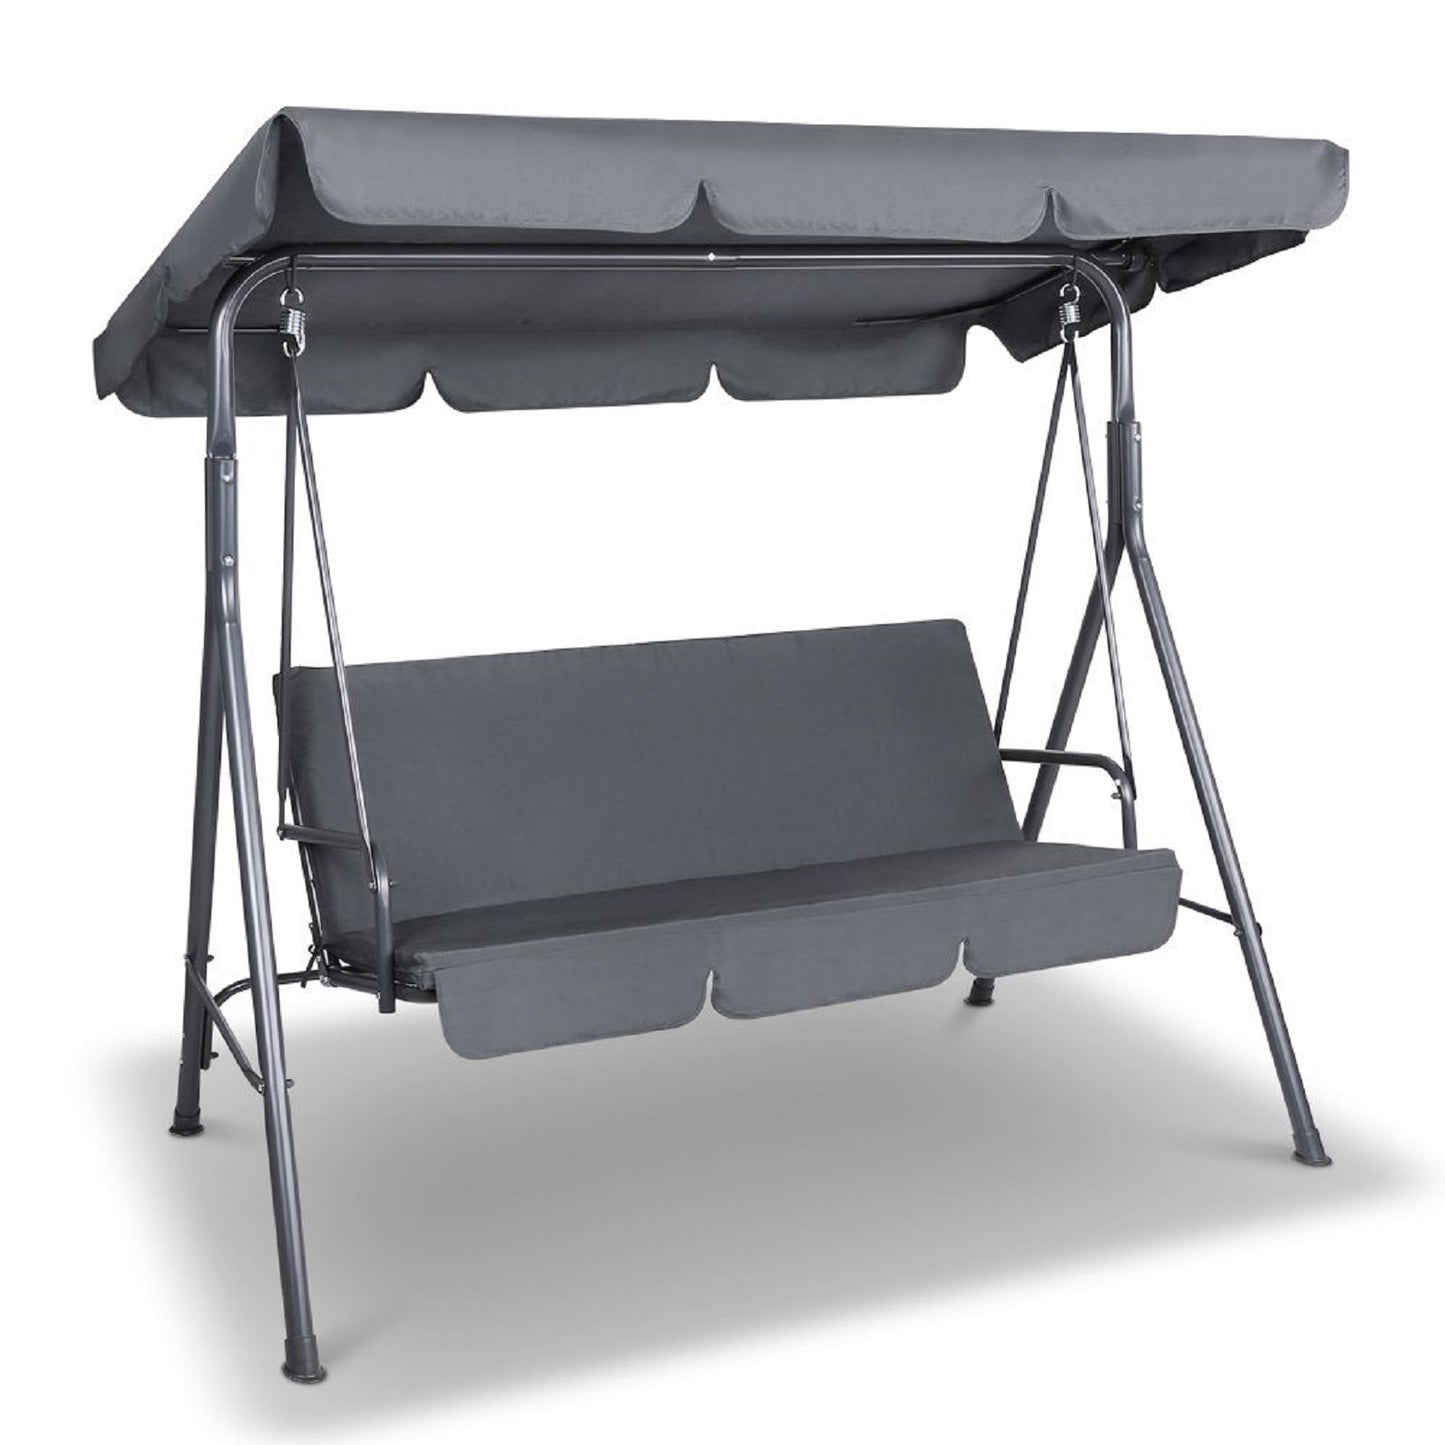 Milano Outdoor Swing Bench Seat Chair Canopy Furniture 3 Seater Garden Hammock - Grey - image4